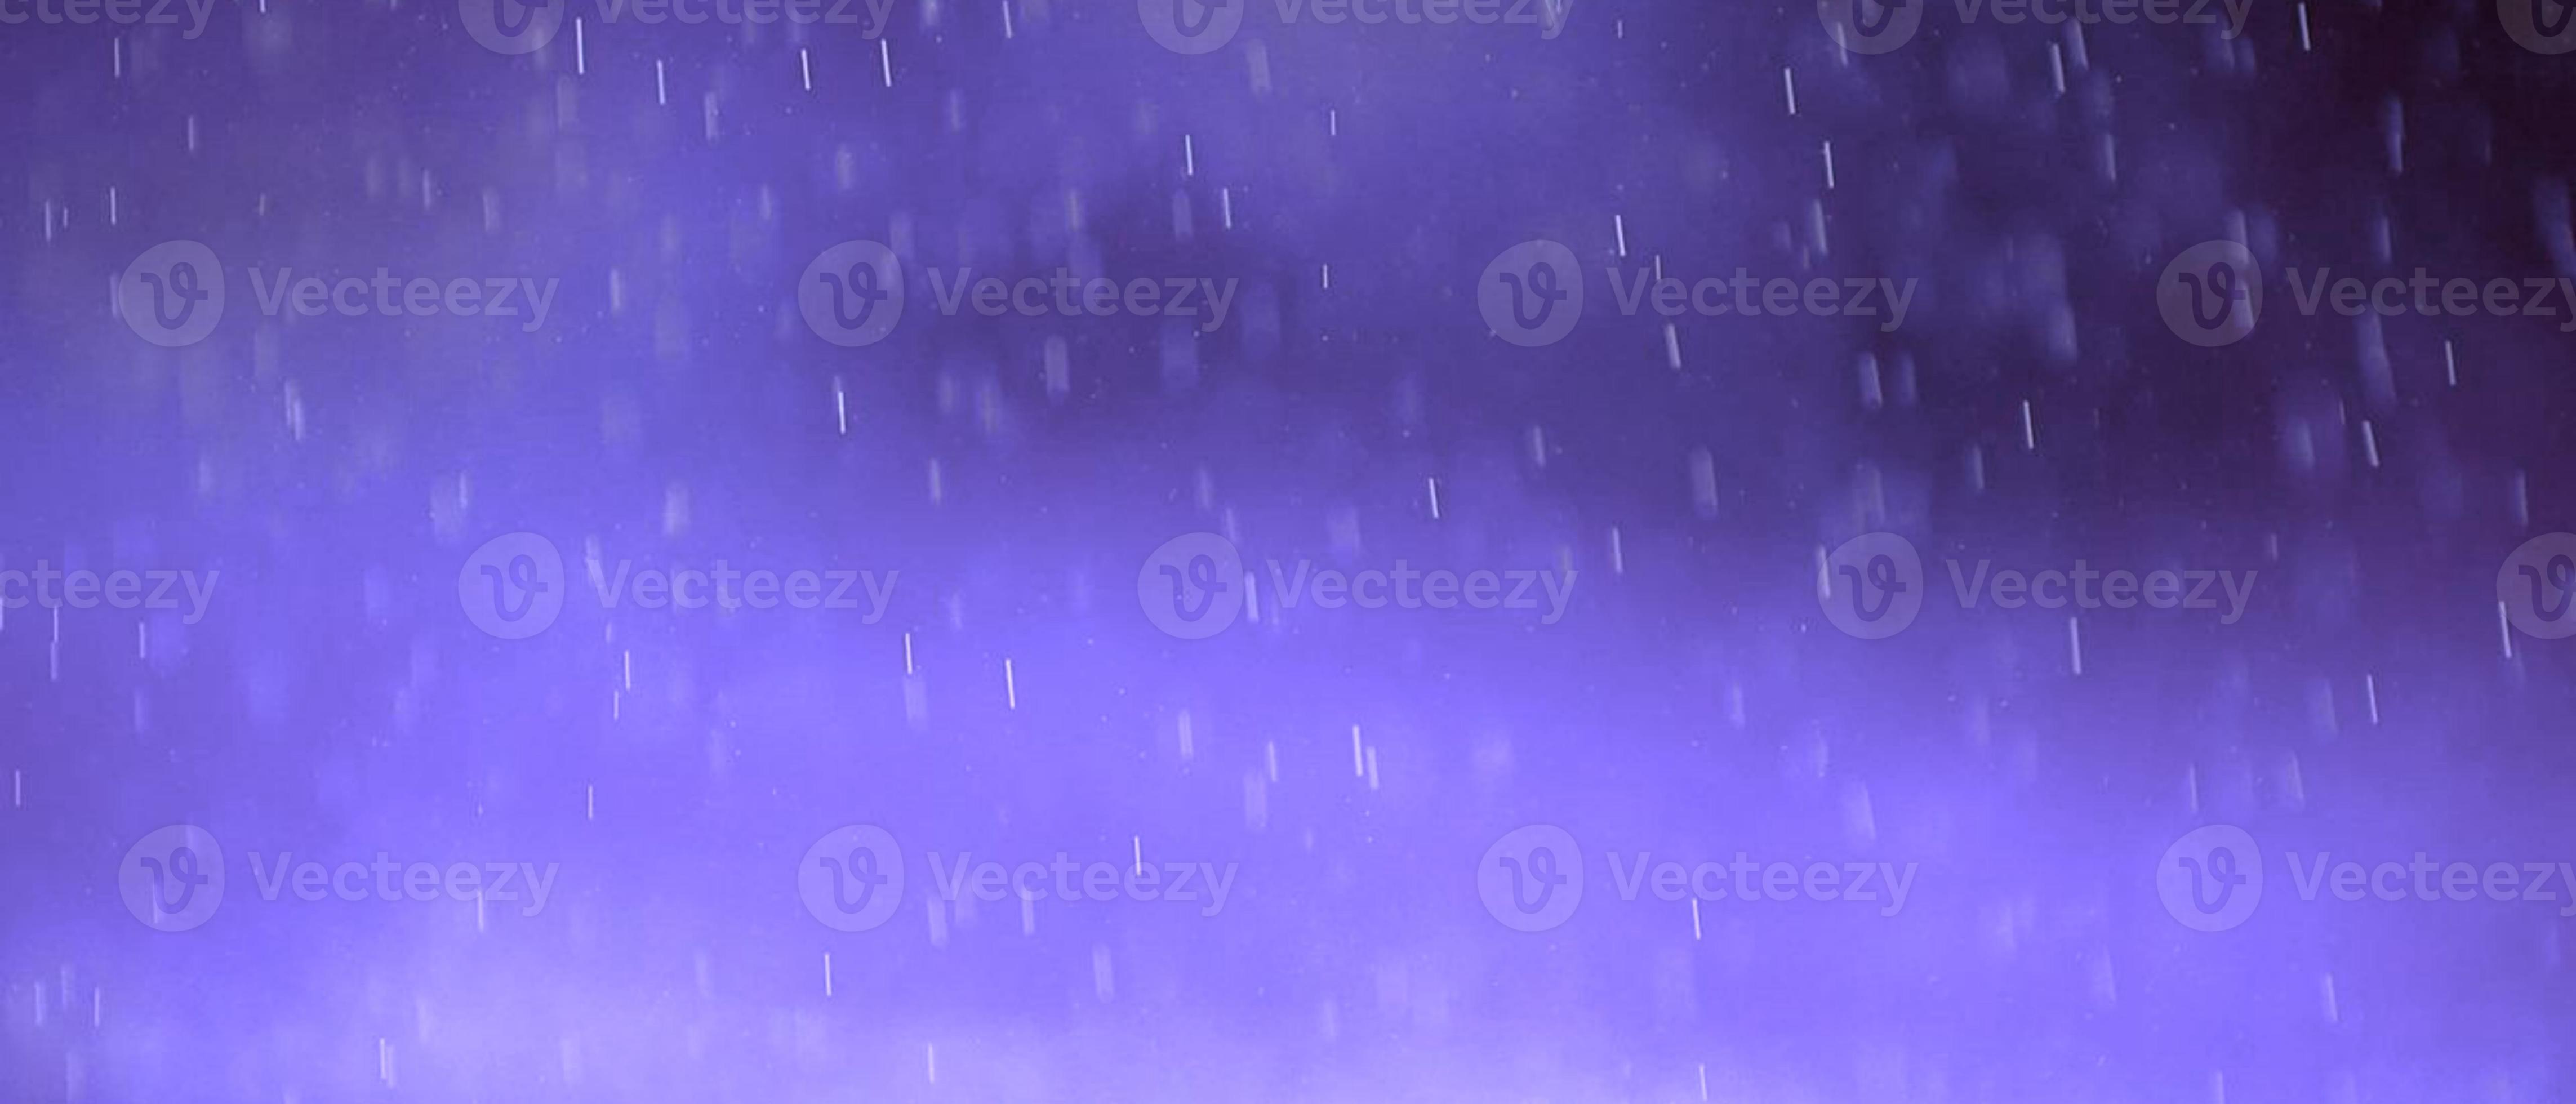 A purple background with rain drops - Computer